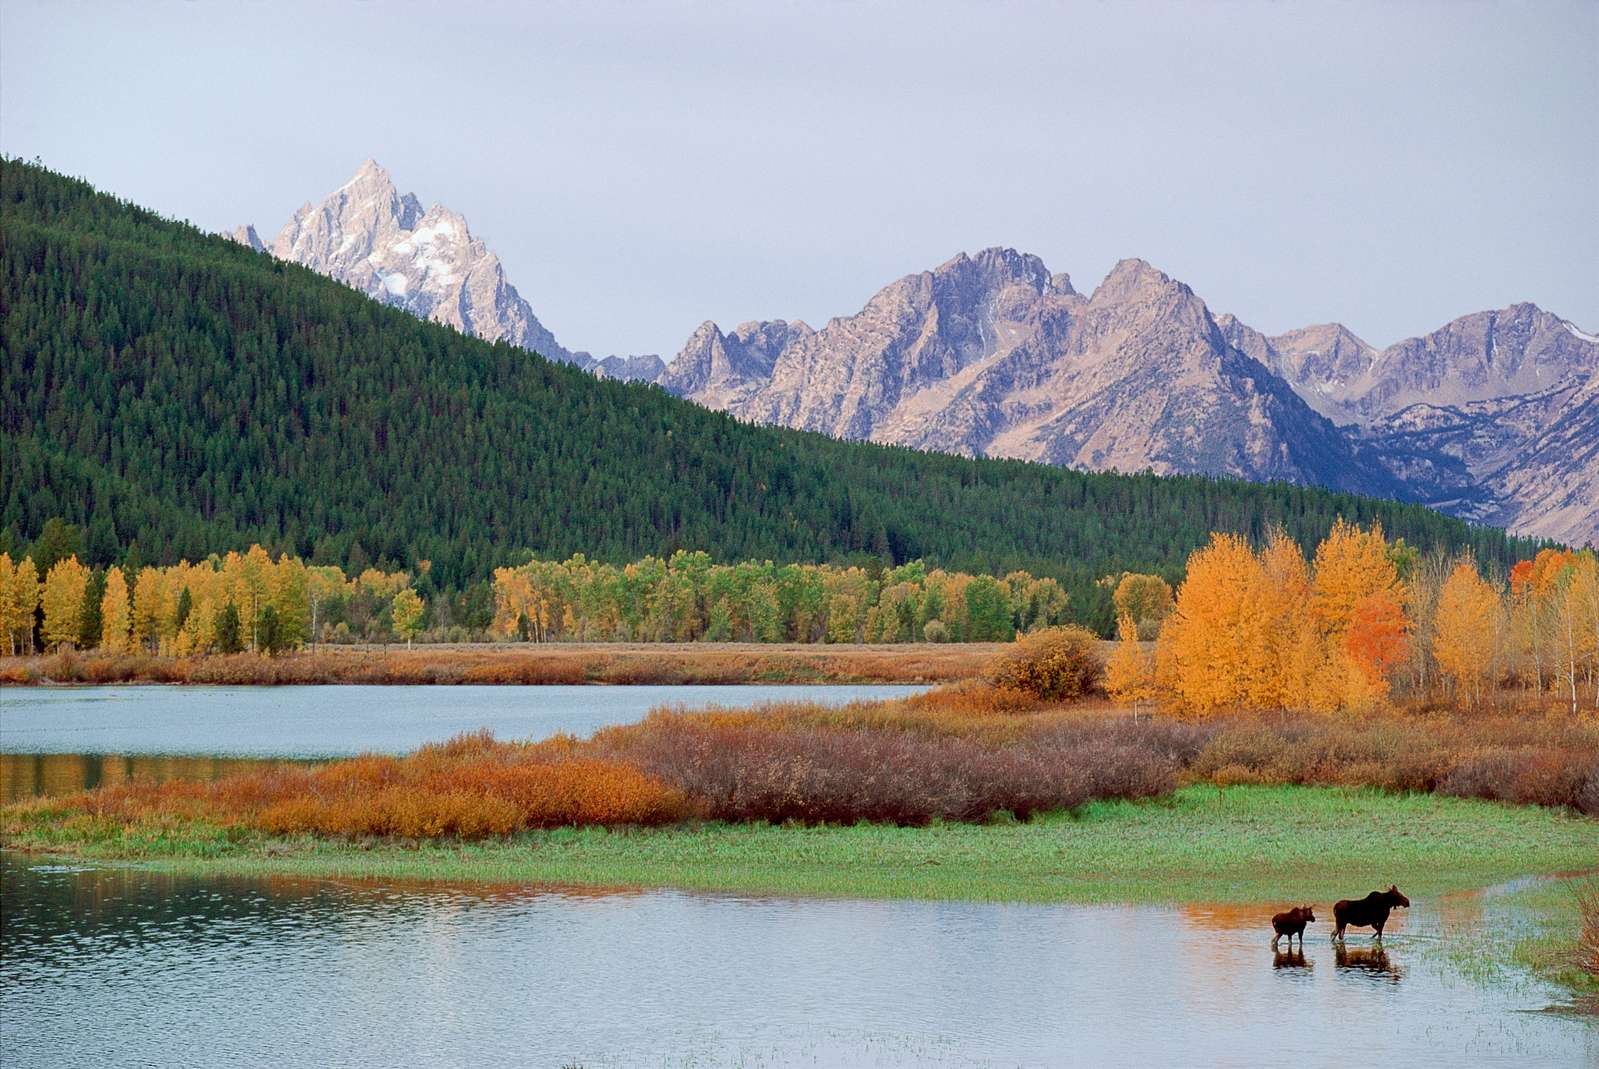 Moose cow and calf at Oxbow Bend of the Snake River, Grand Teton National Park, Wyoming, mountain range, National Parks, Grand Tetons, moose, baby moose, fall colors